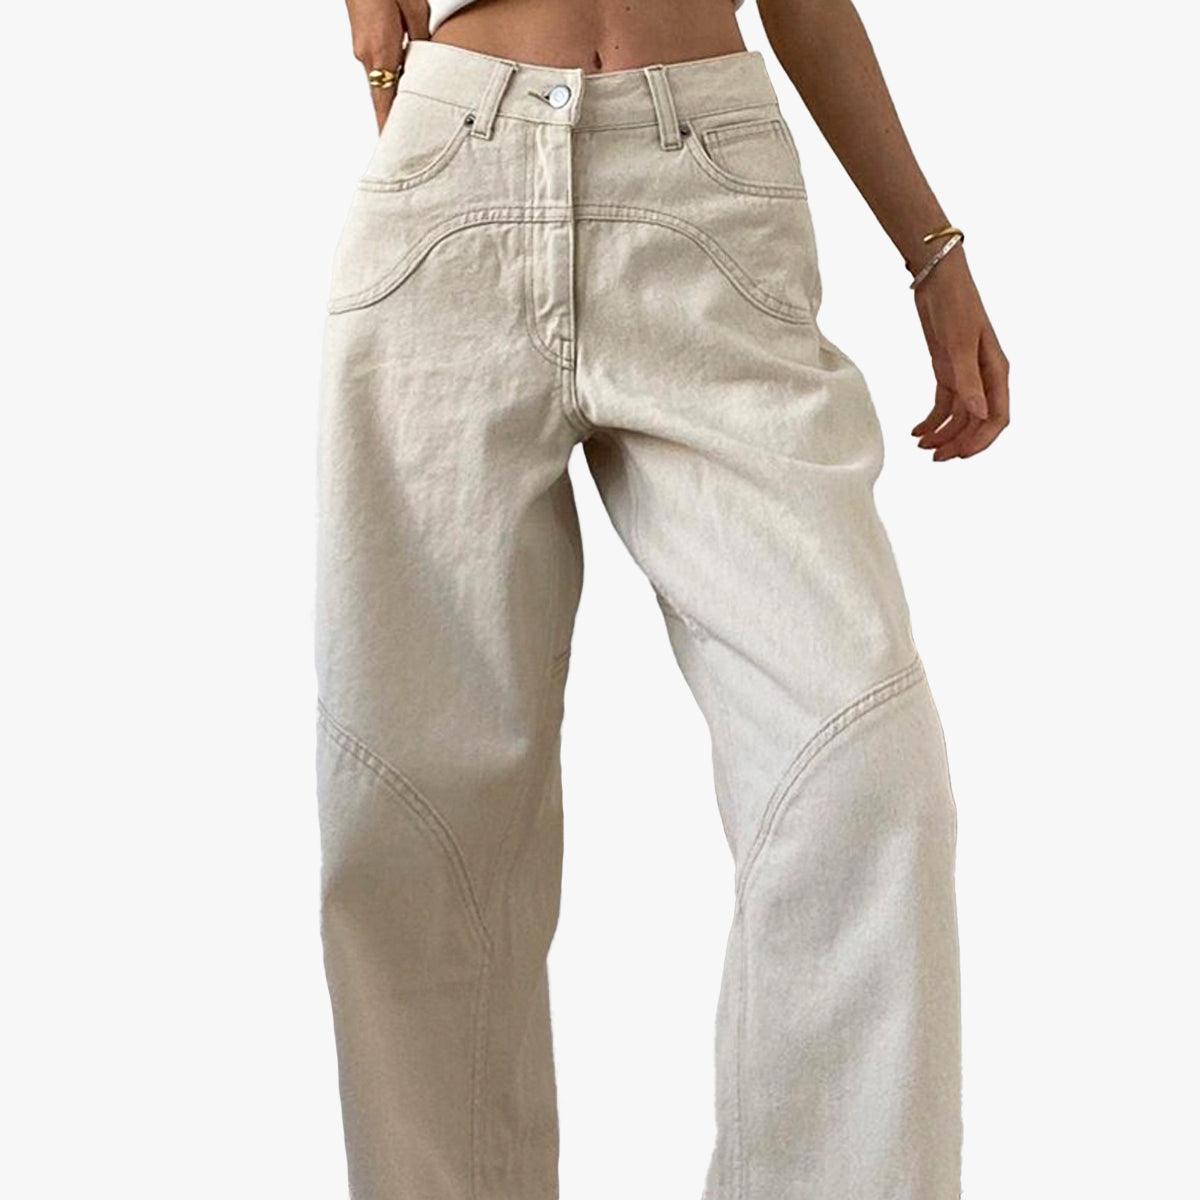 Western Wide Leg Beige Jeans • Aesthetic Clothes